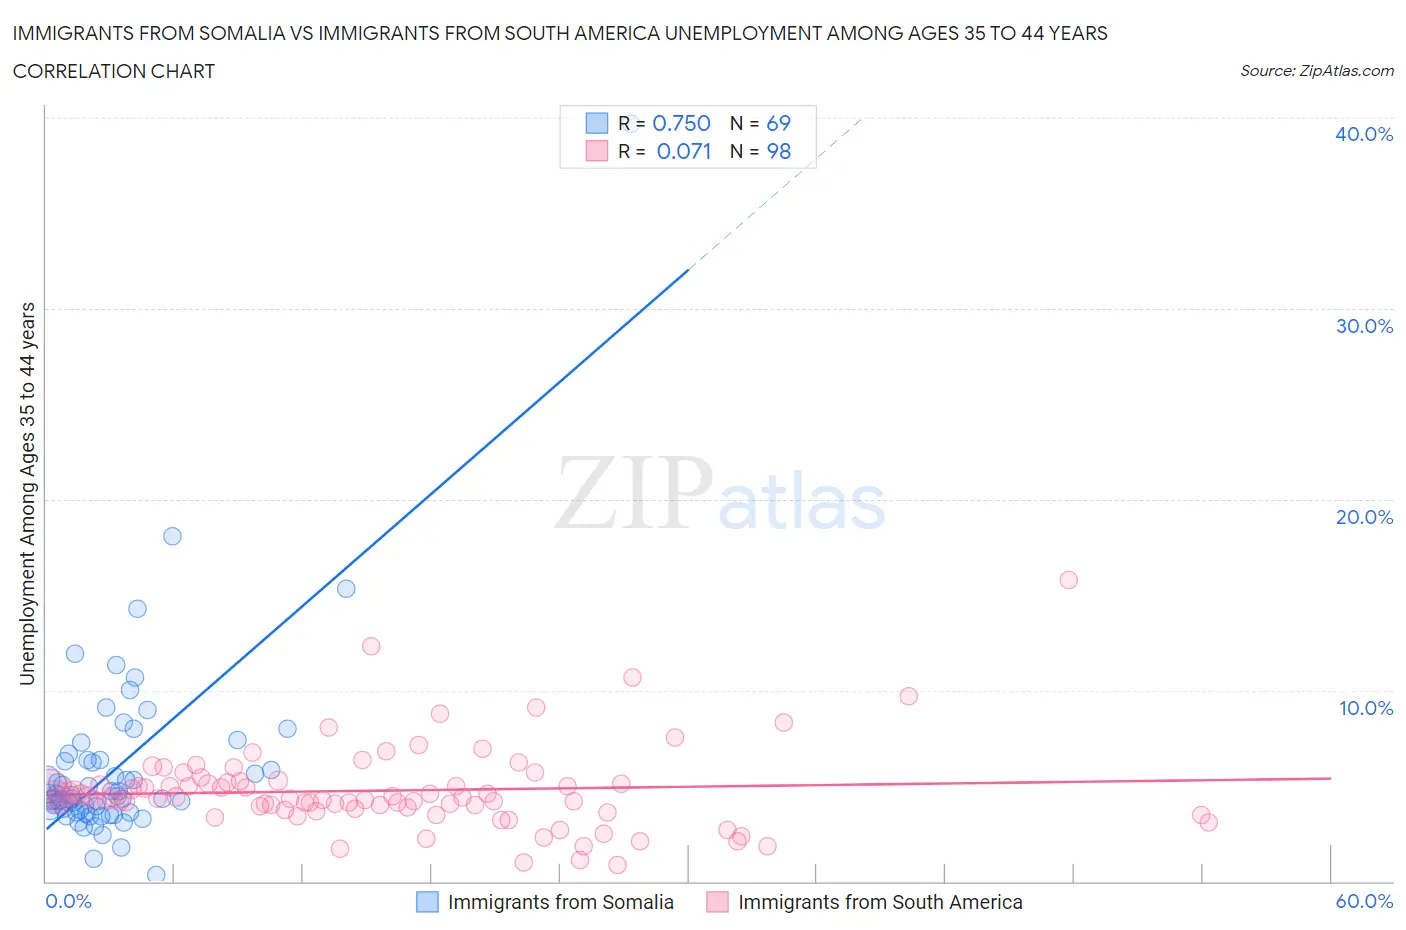 Immigrants from Somalia vs Immigrants from South America Unemployment Among Ages 35 to 44 years